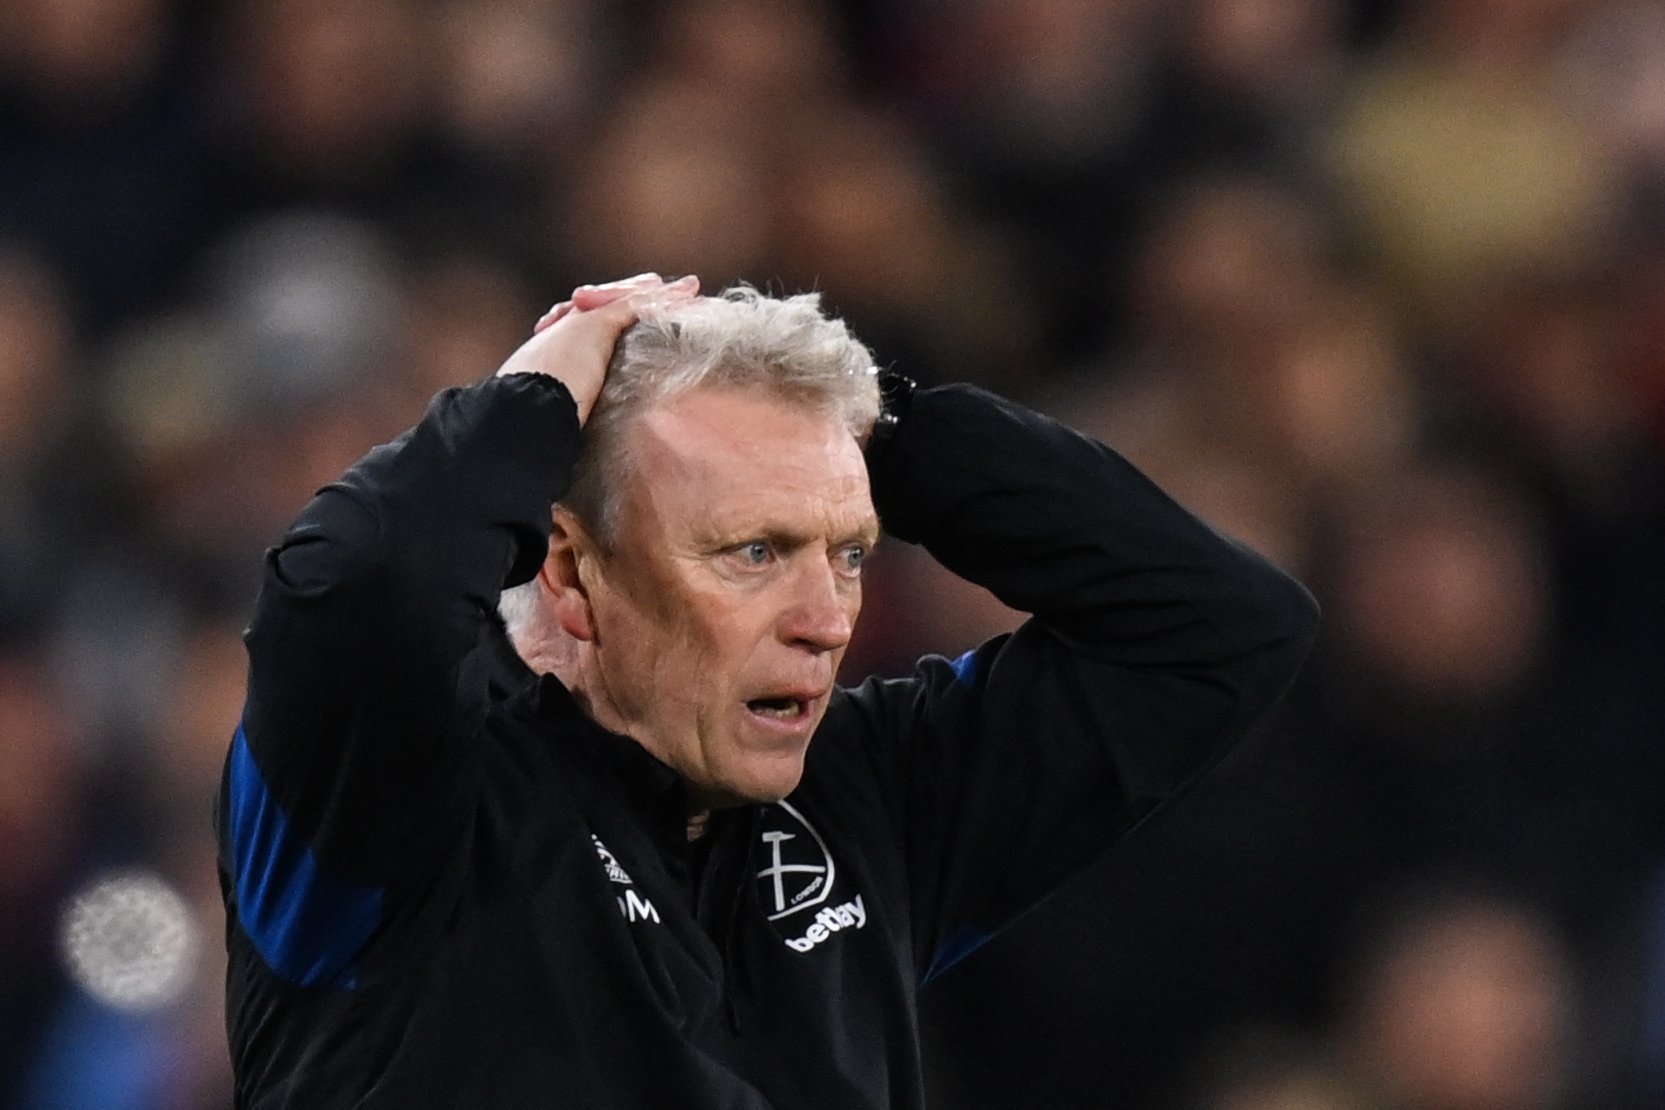 David Moyes refuses to discuss referee after West Ham red card against Lyon and lauds resilience